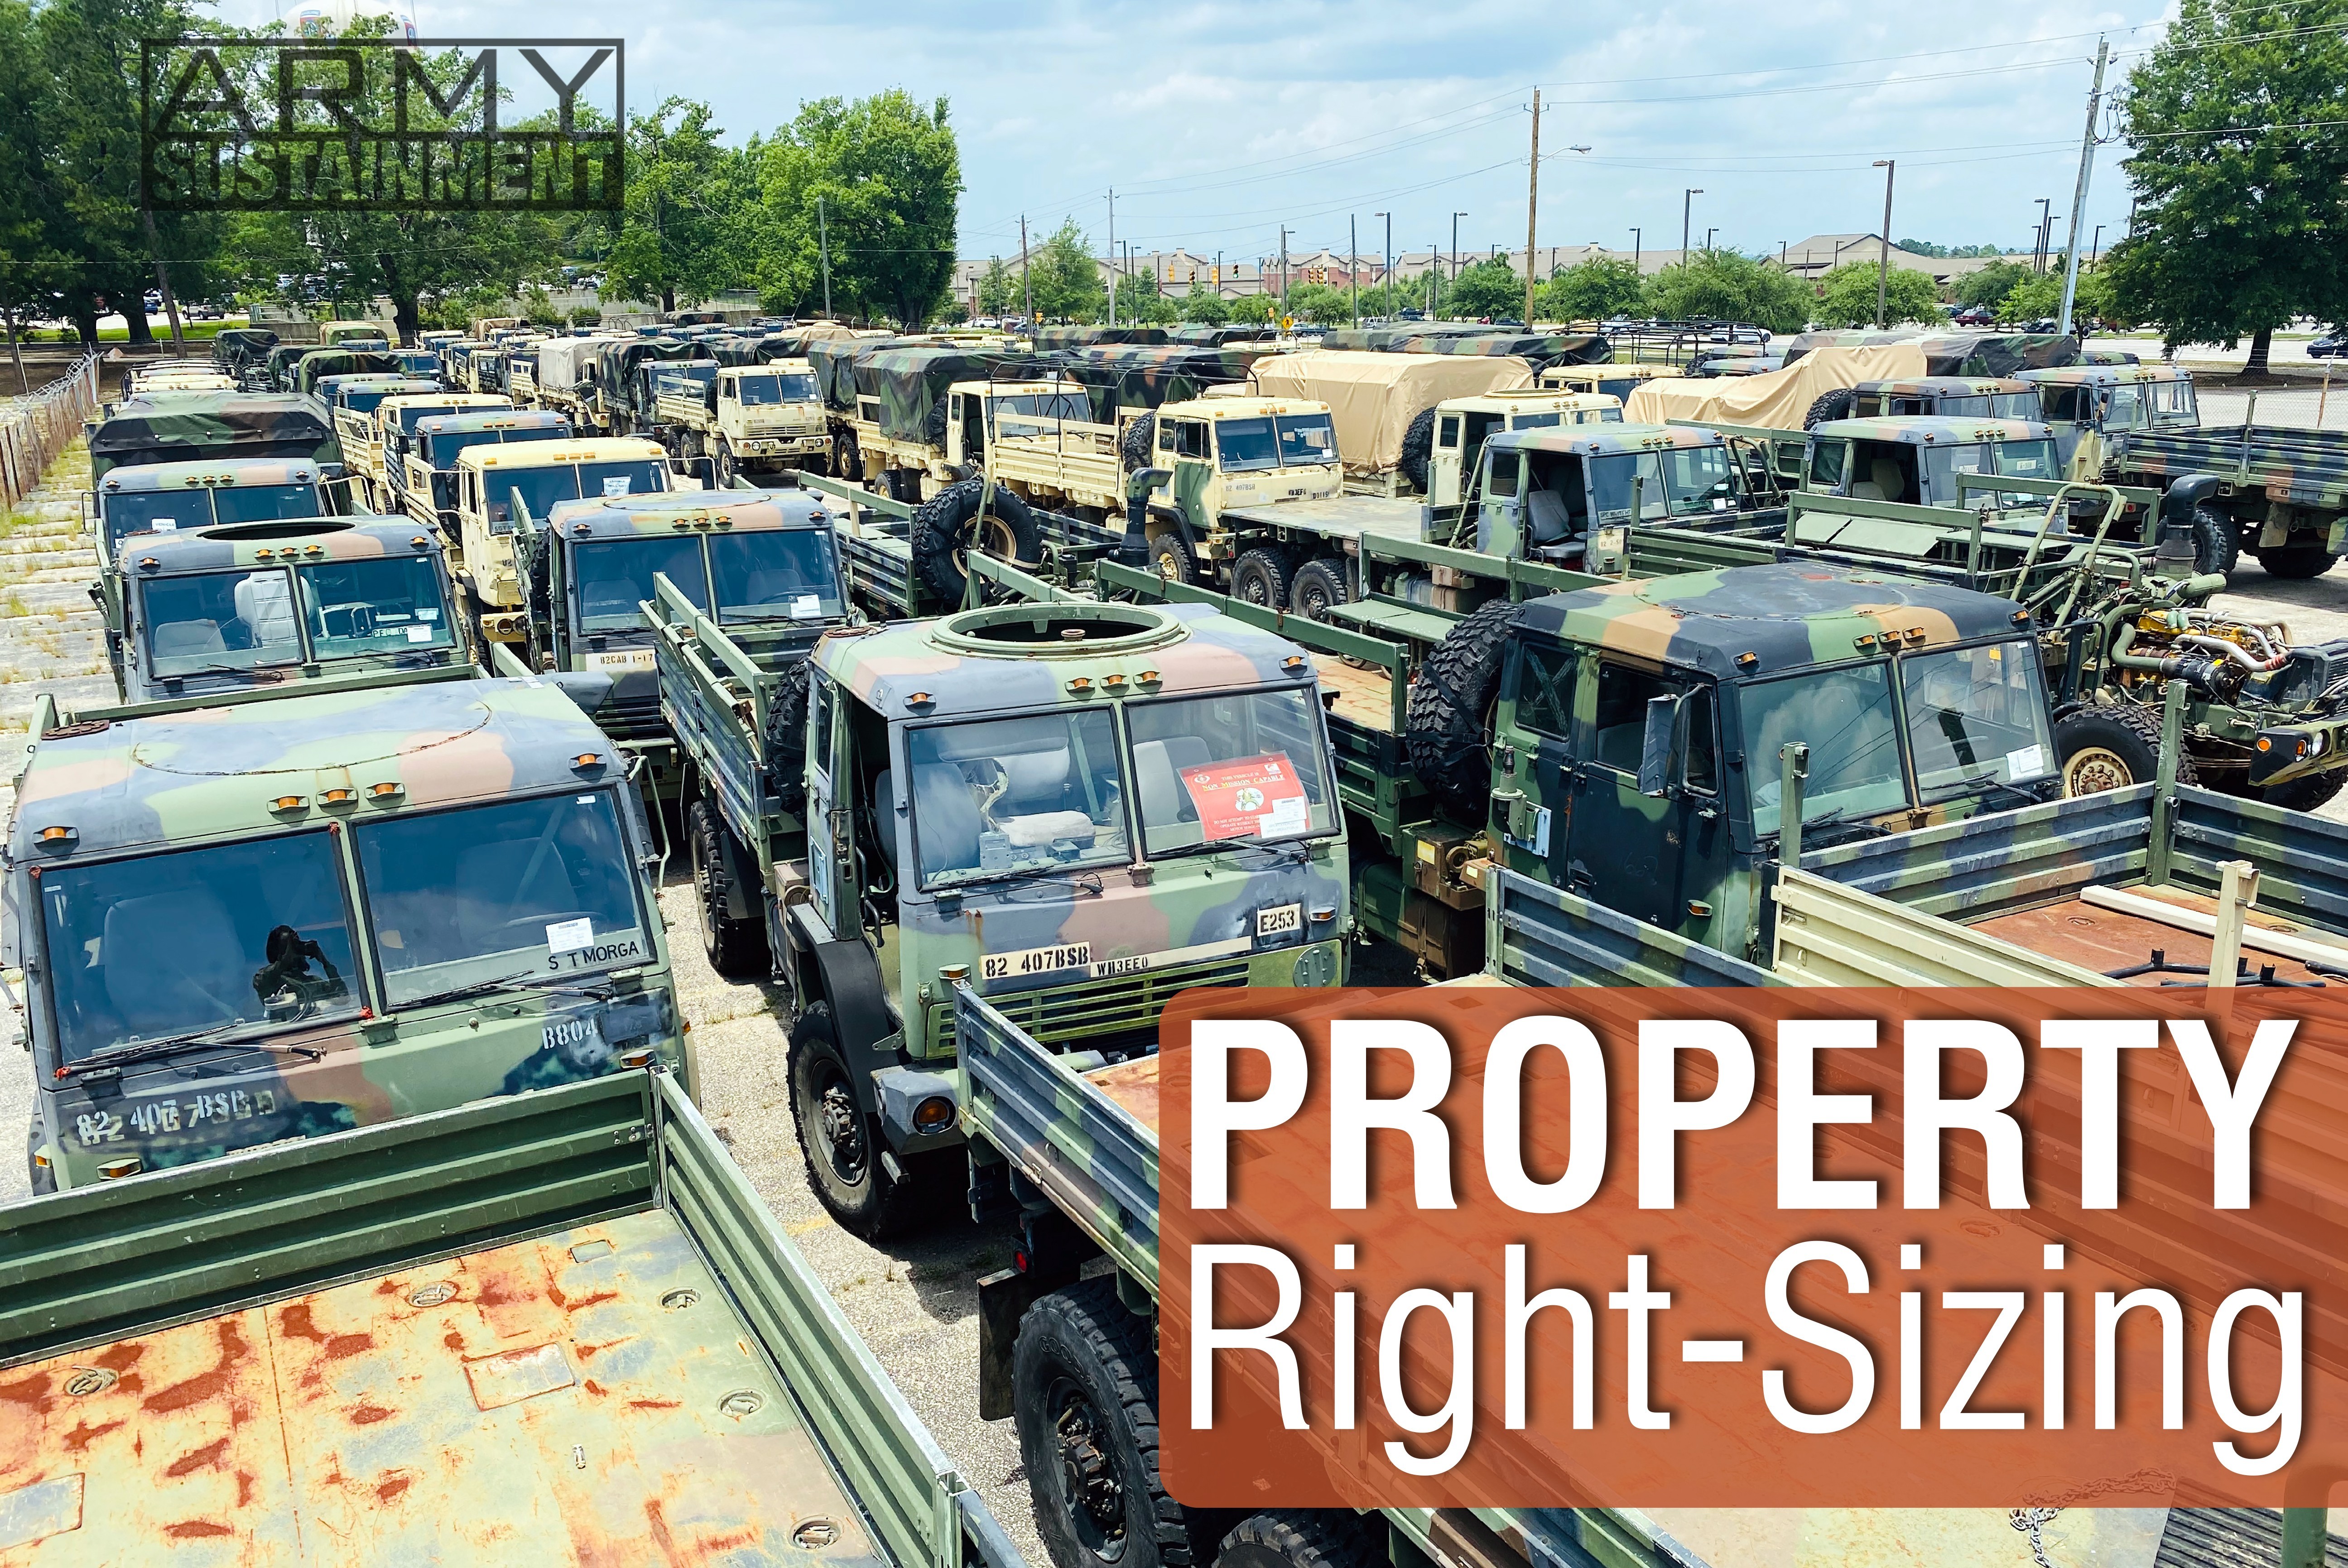 Property Right-Sizing: All-American Division Rids Itself of Excess Property - Article - The United States Army